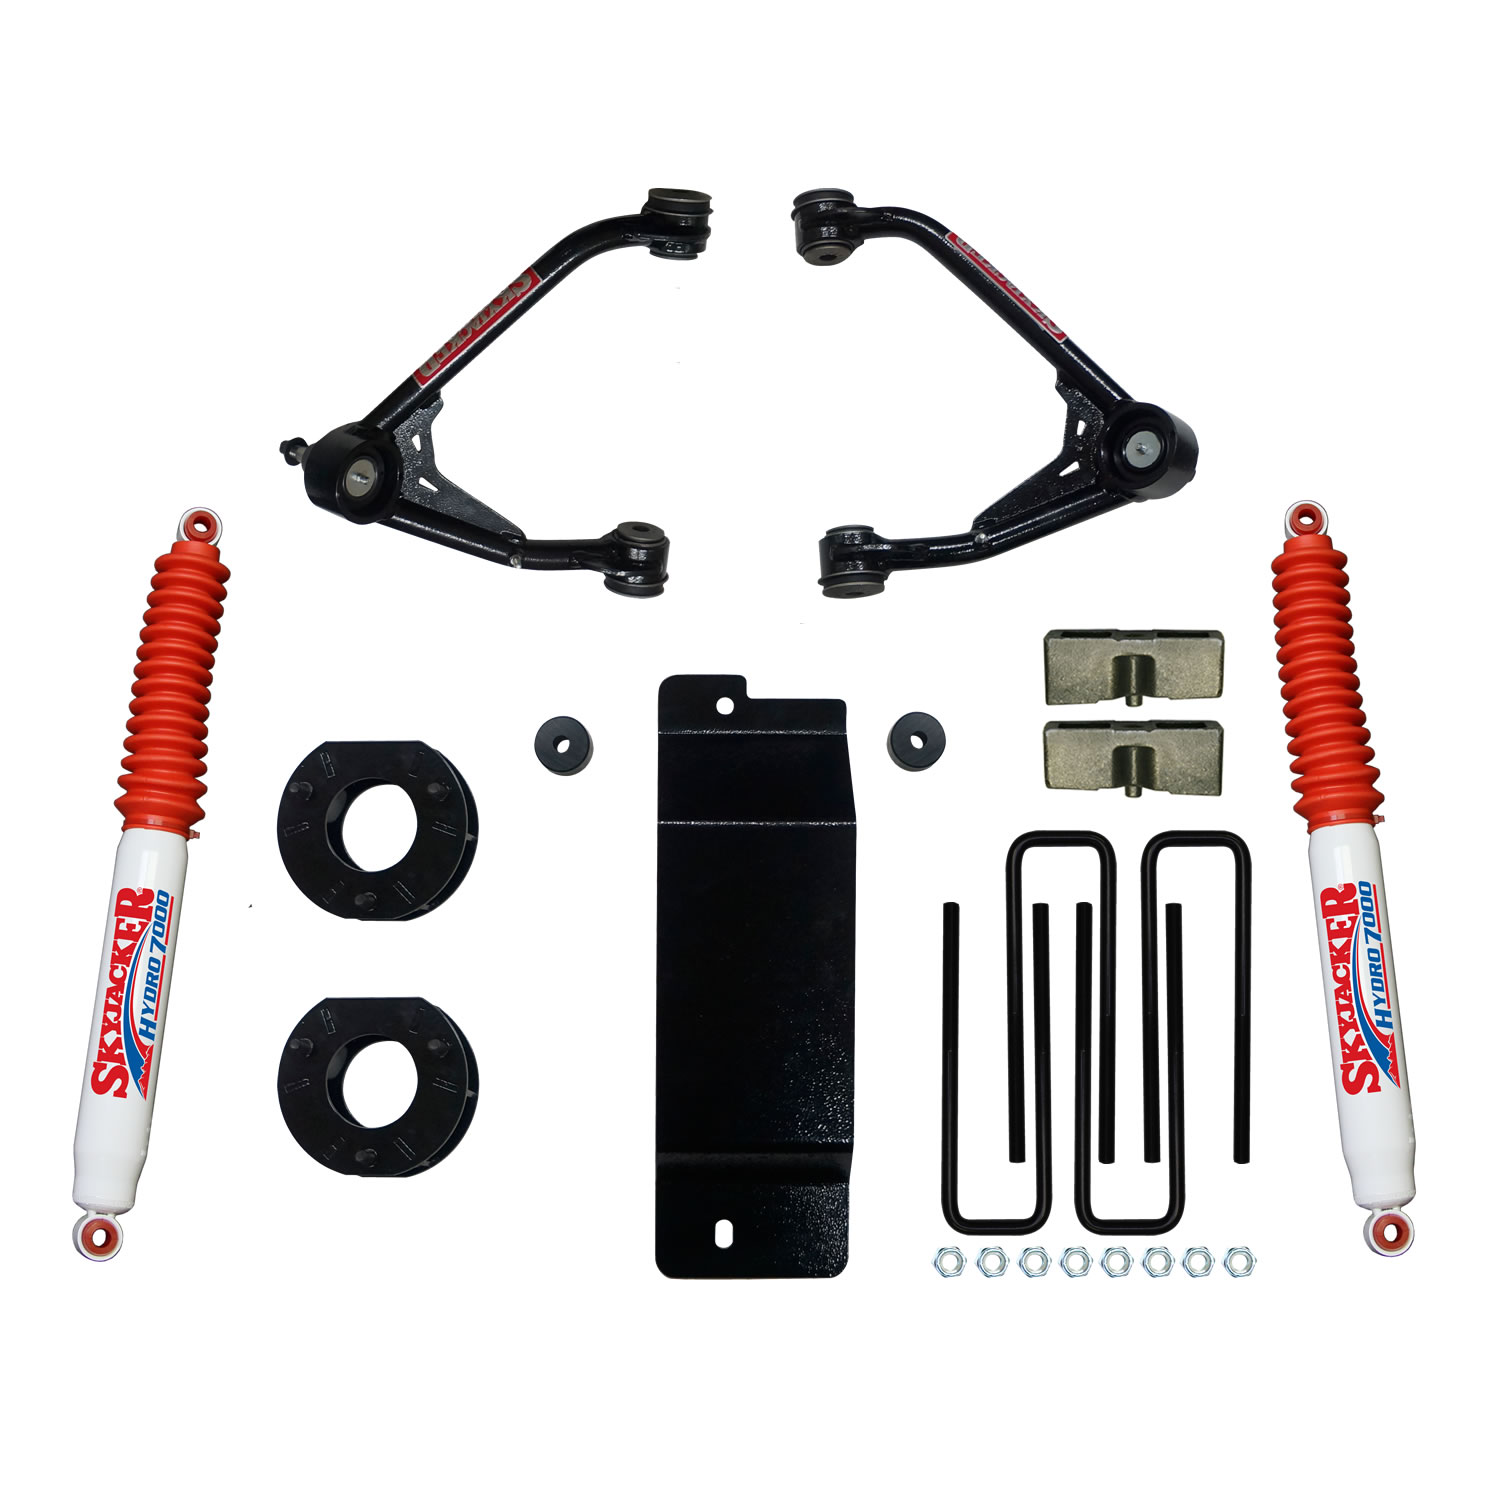 3.000-3.500 In. Upper Control Arm Lift Kit with